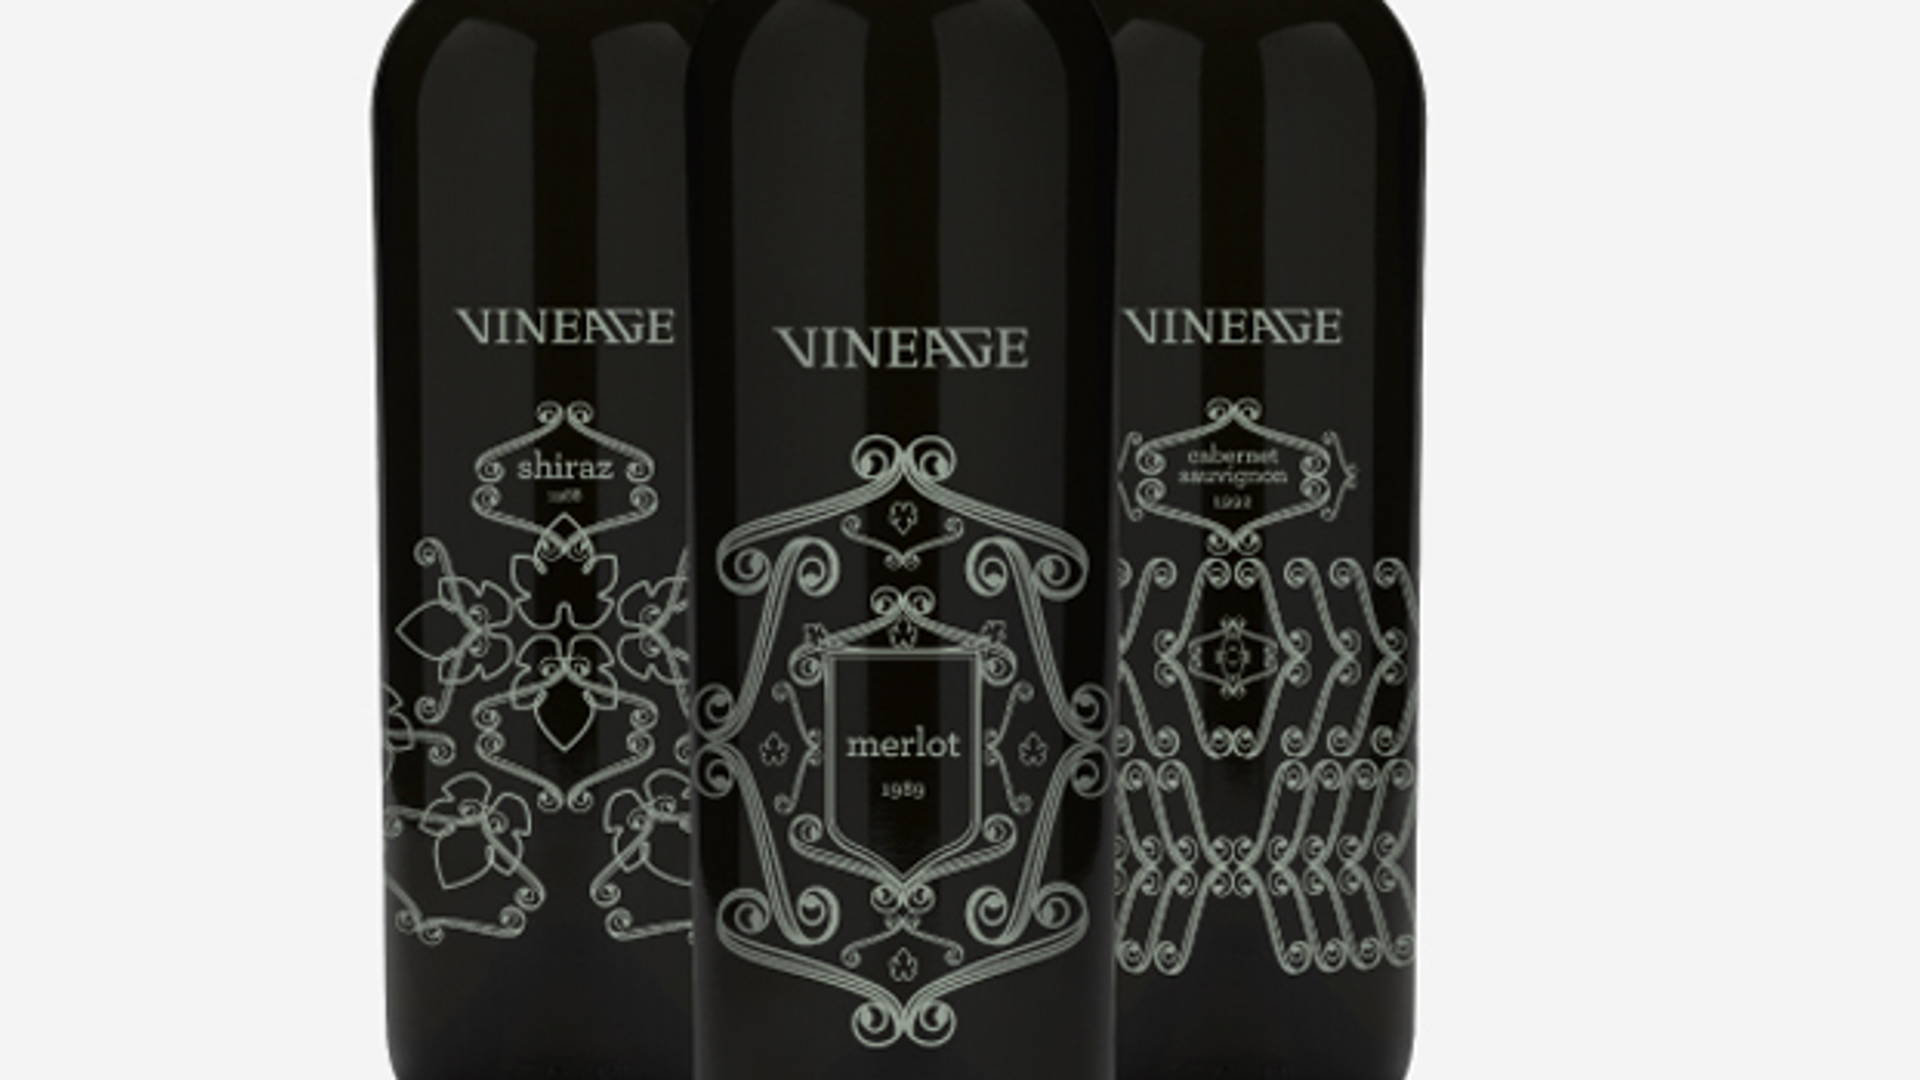 Featured image for Vineage Wines